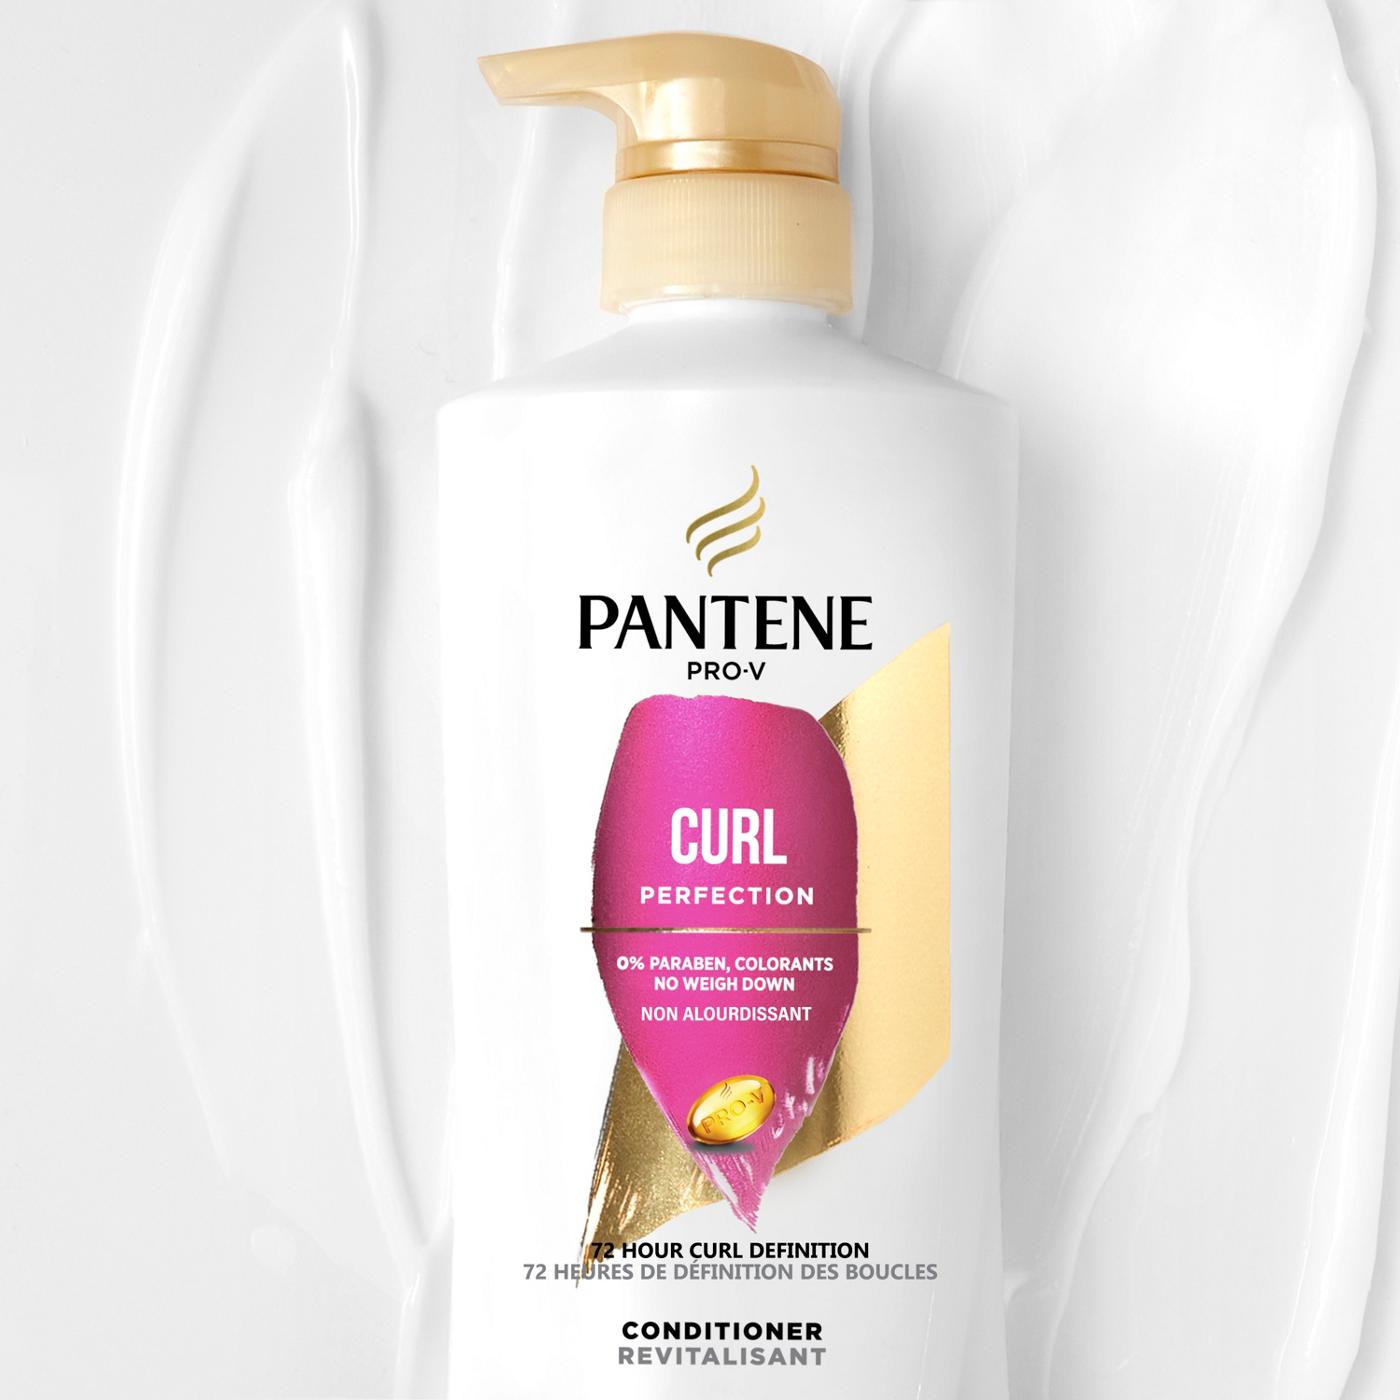 Pantene PRO-V Curl Perfection Conditioner; image 8 of 10